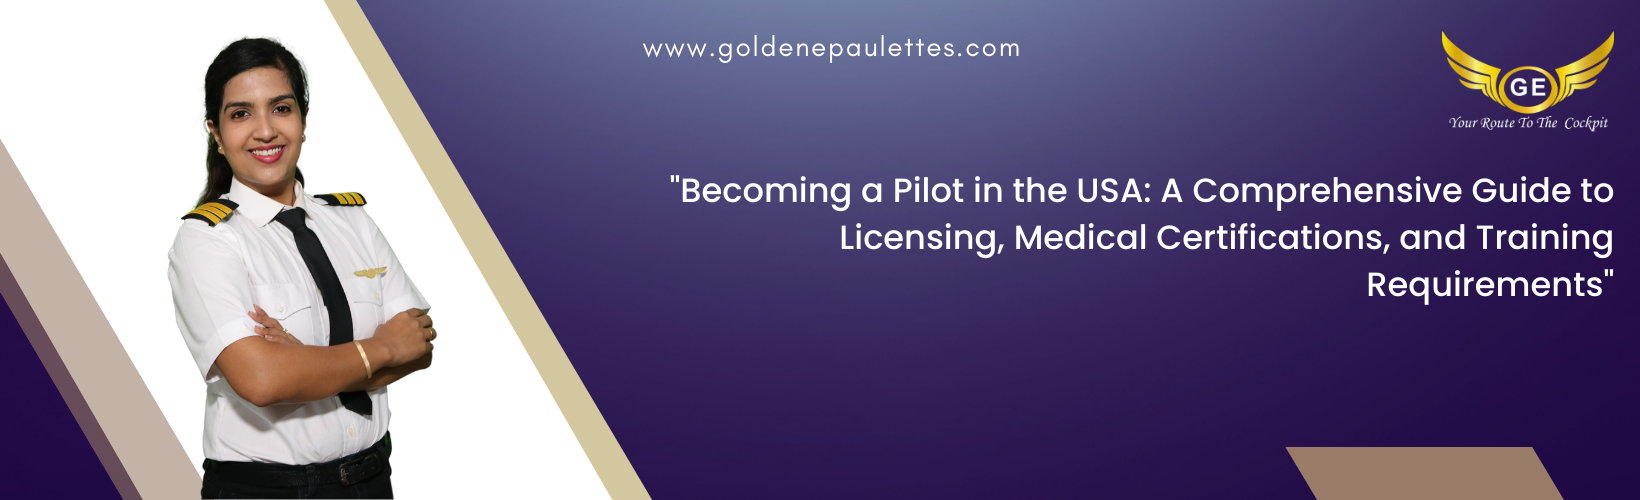 The Requirements of Becoming a Pilot in the USA